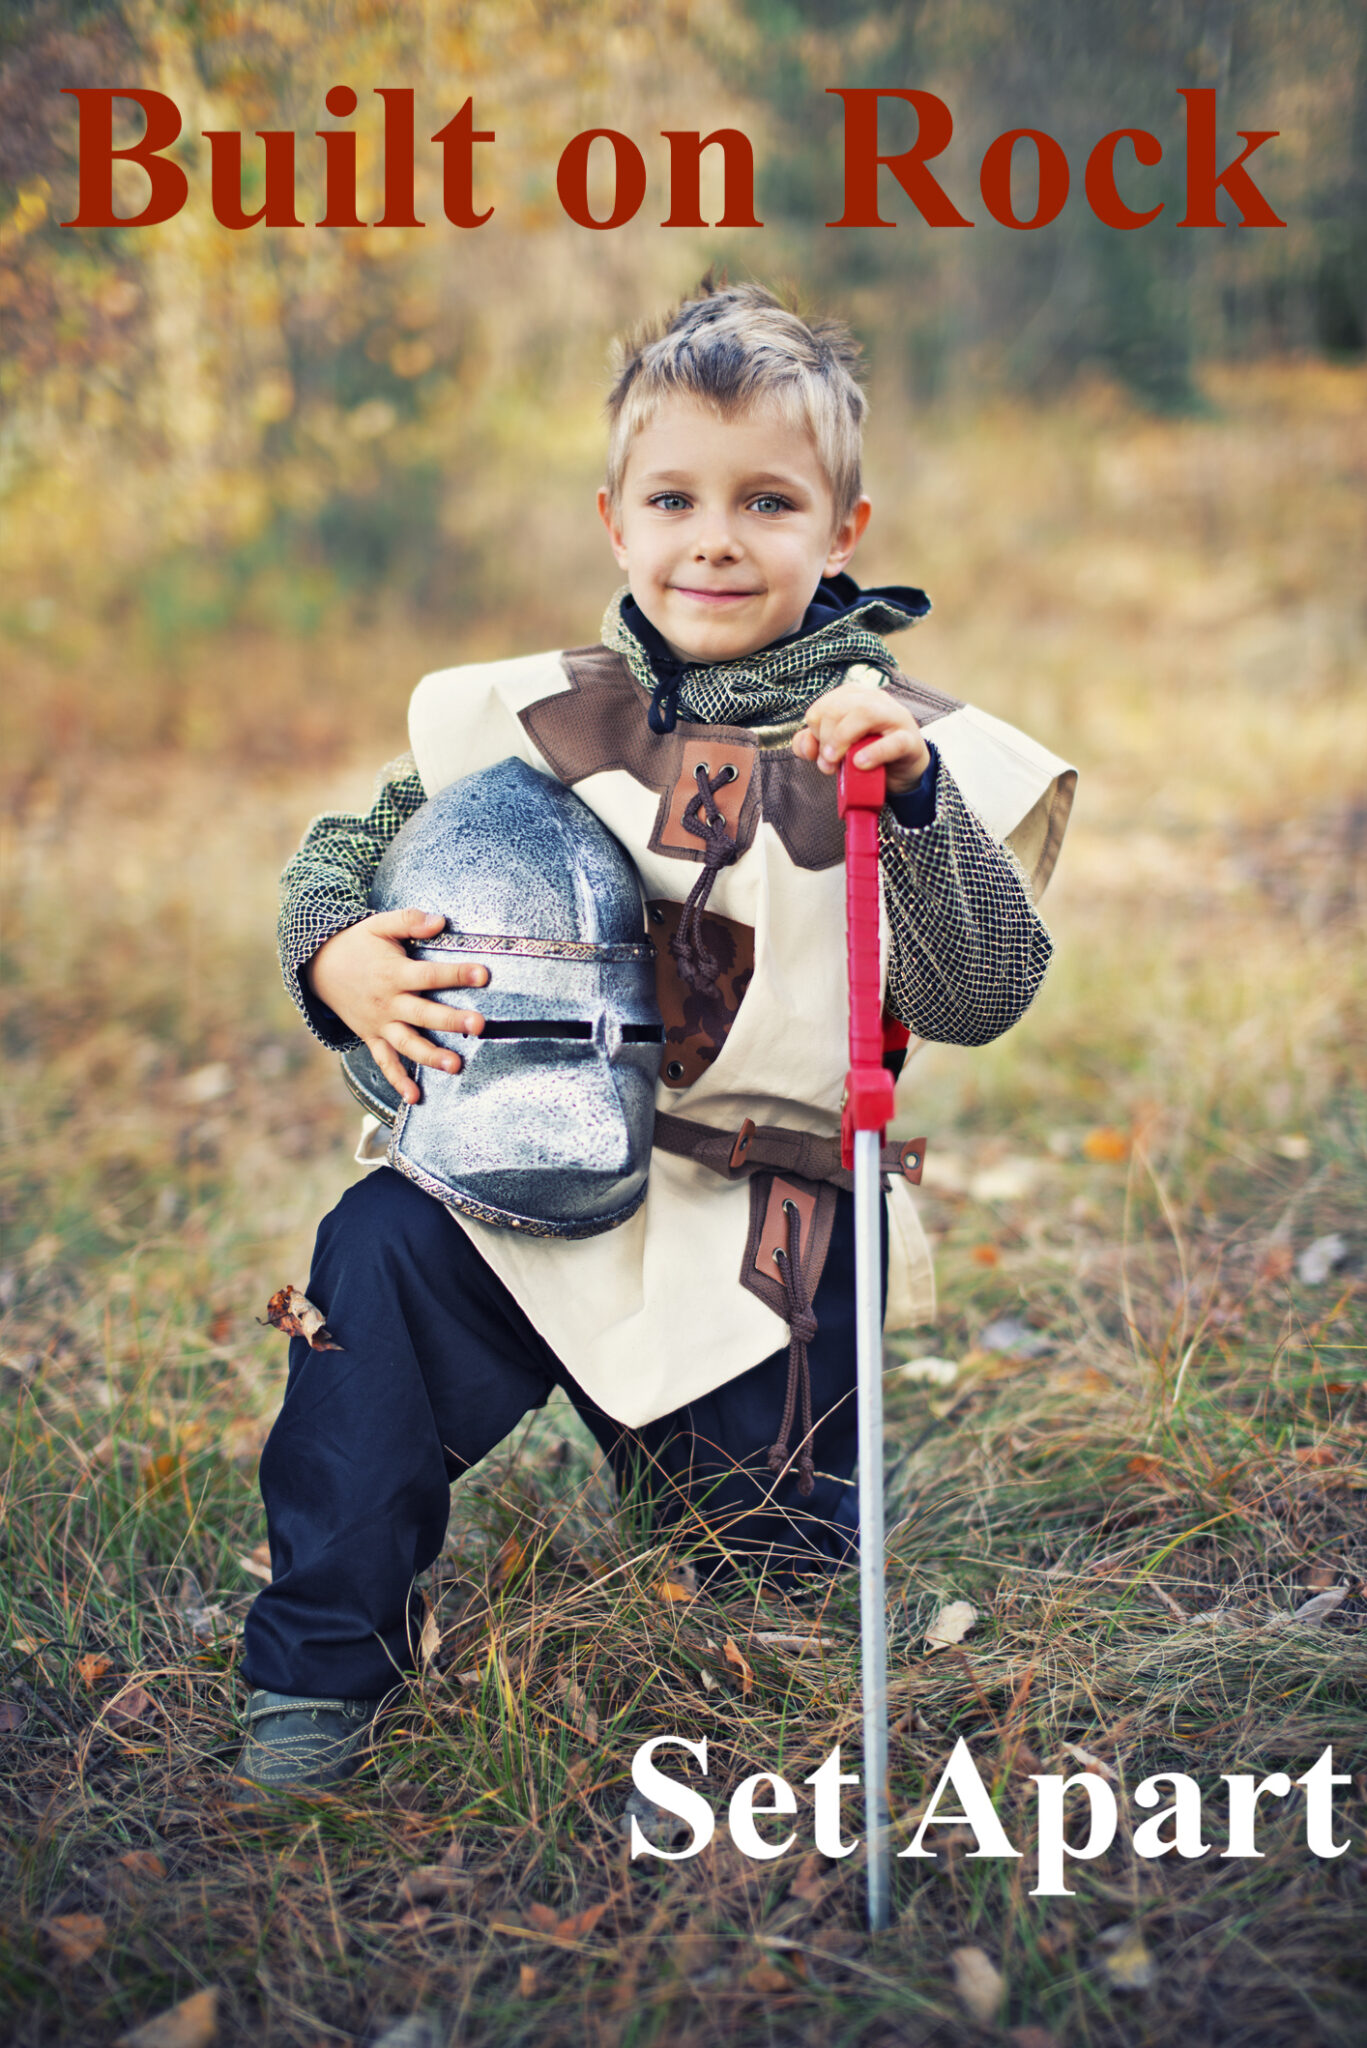 Portrait of a brave little knight kneeling. The boy is 4 and is wearing knight's outfit.